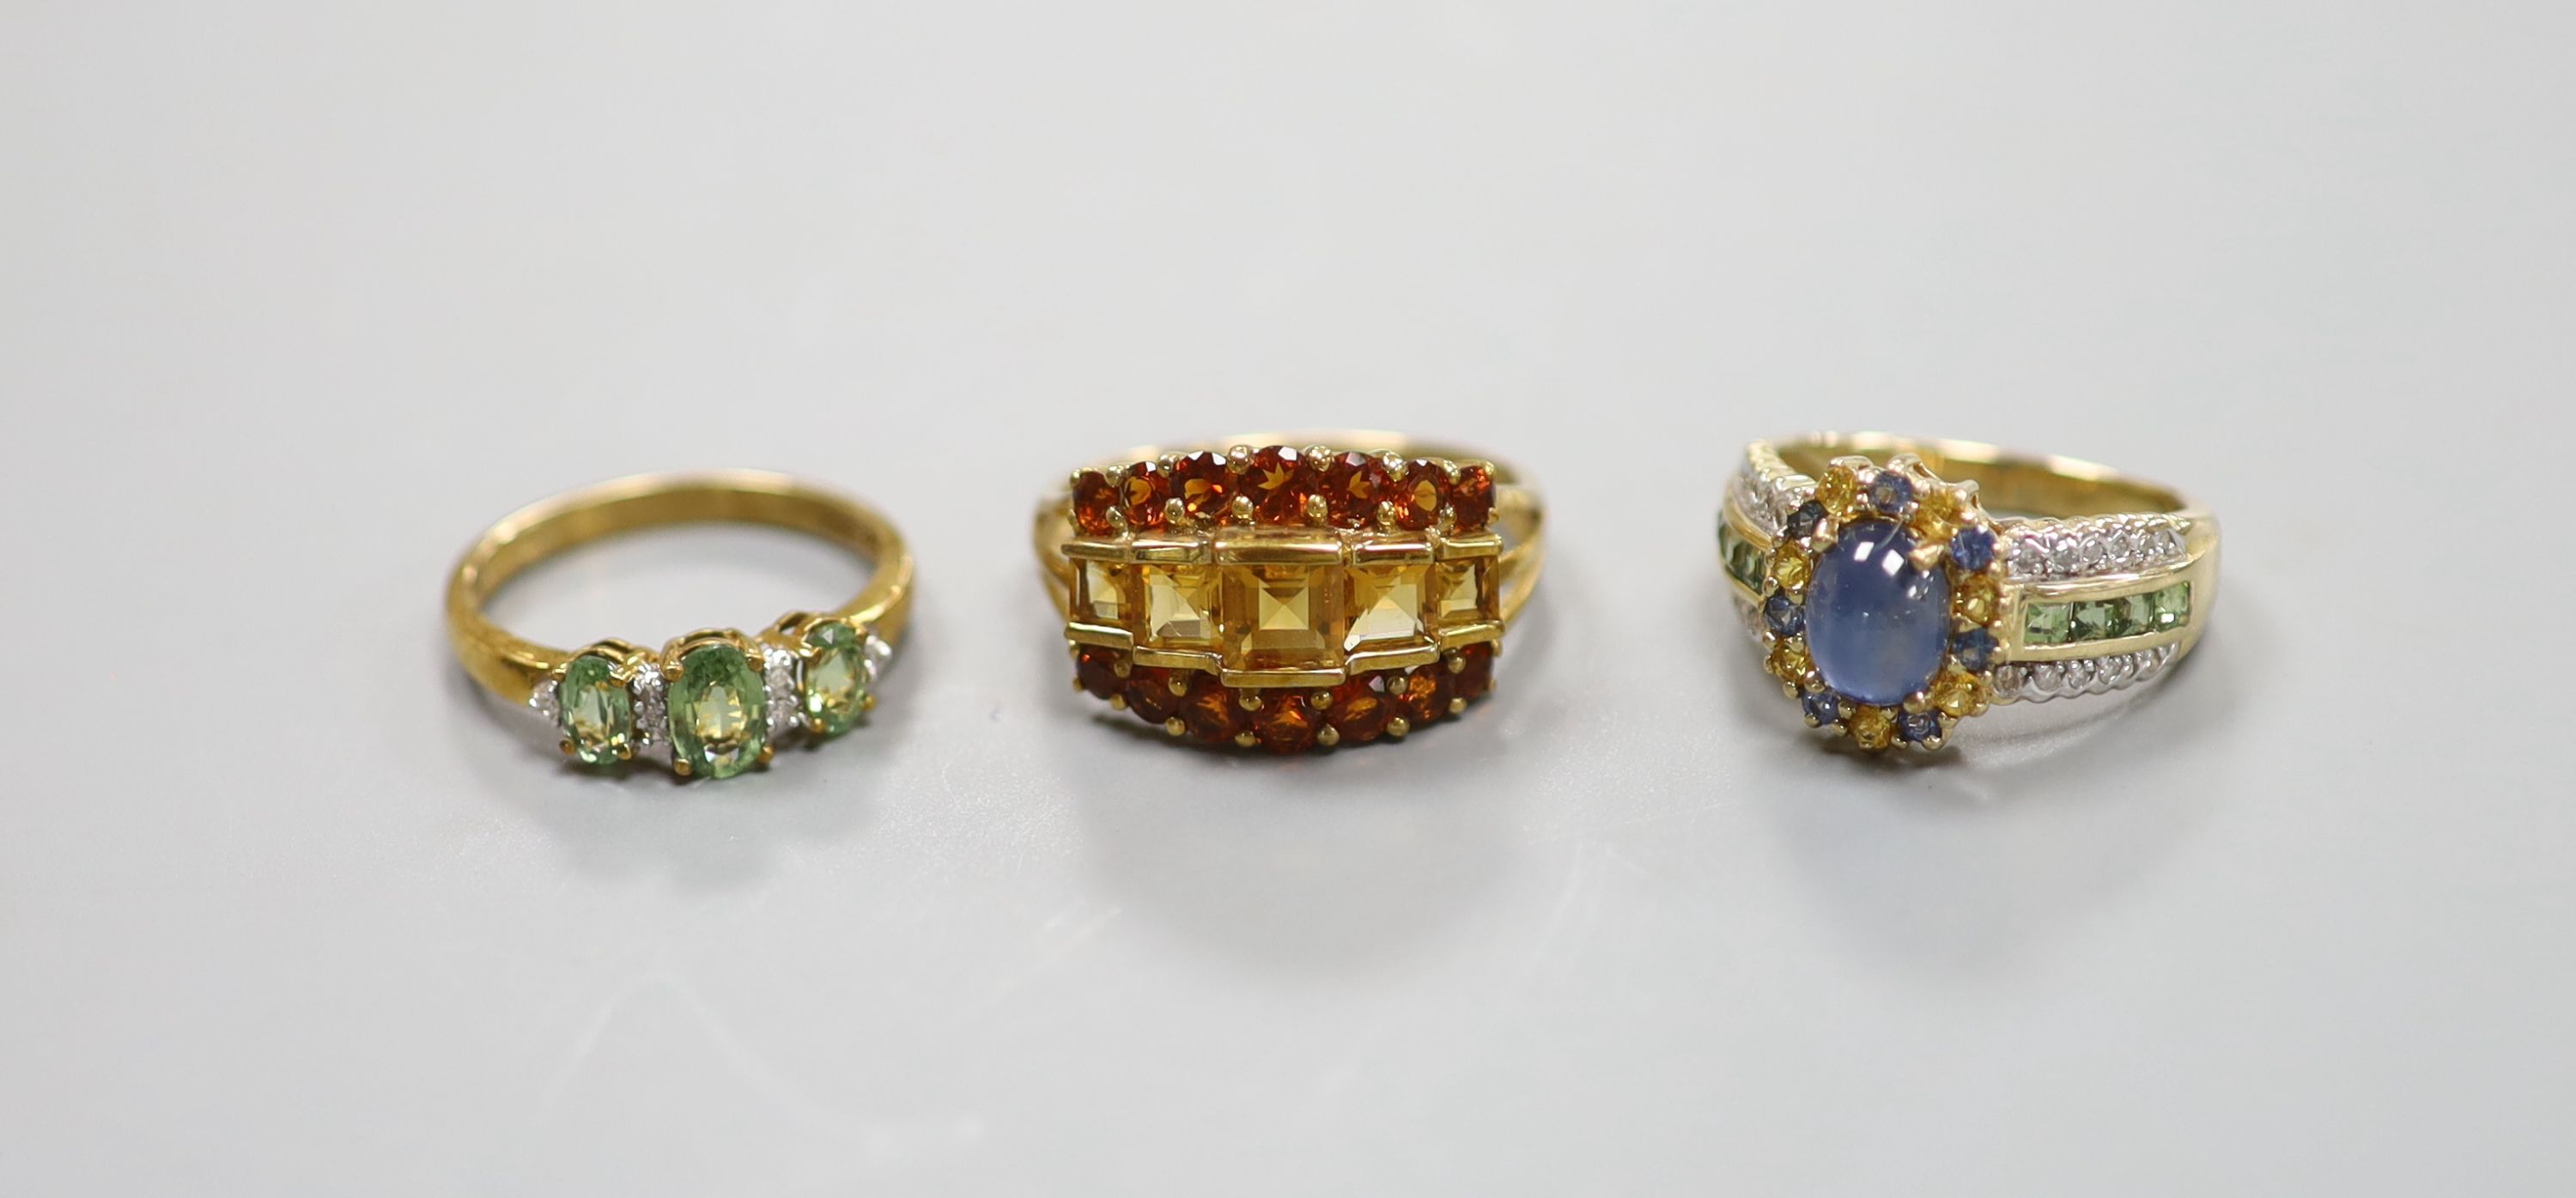 A 9ct gold cabochon sapphire and diamond ring and two other 9ct gold gem-set rings